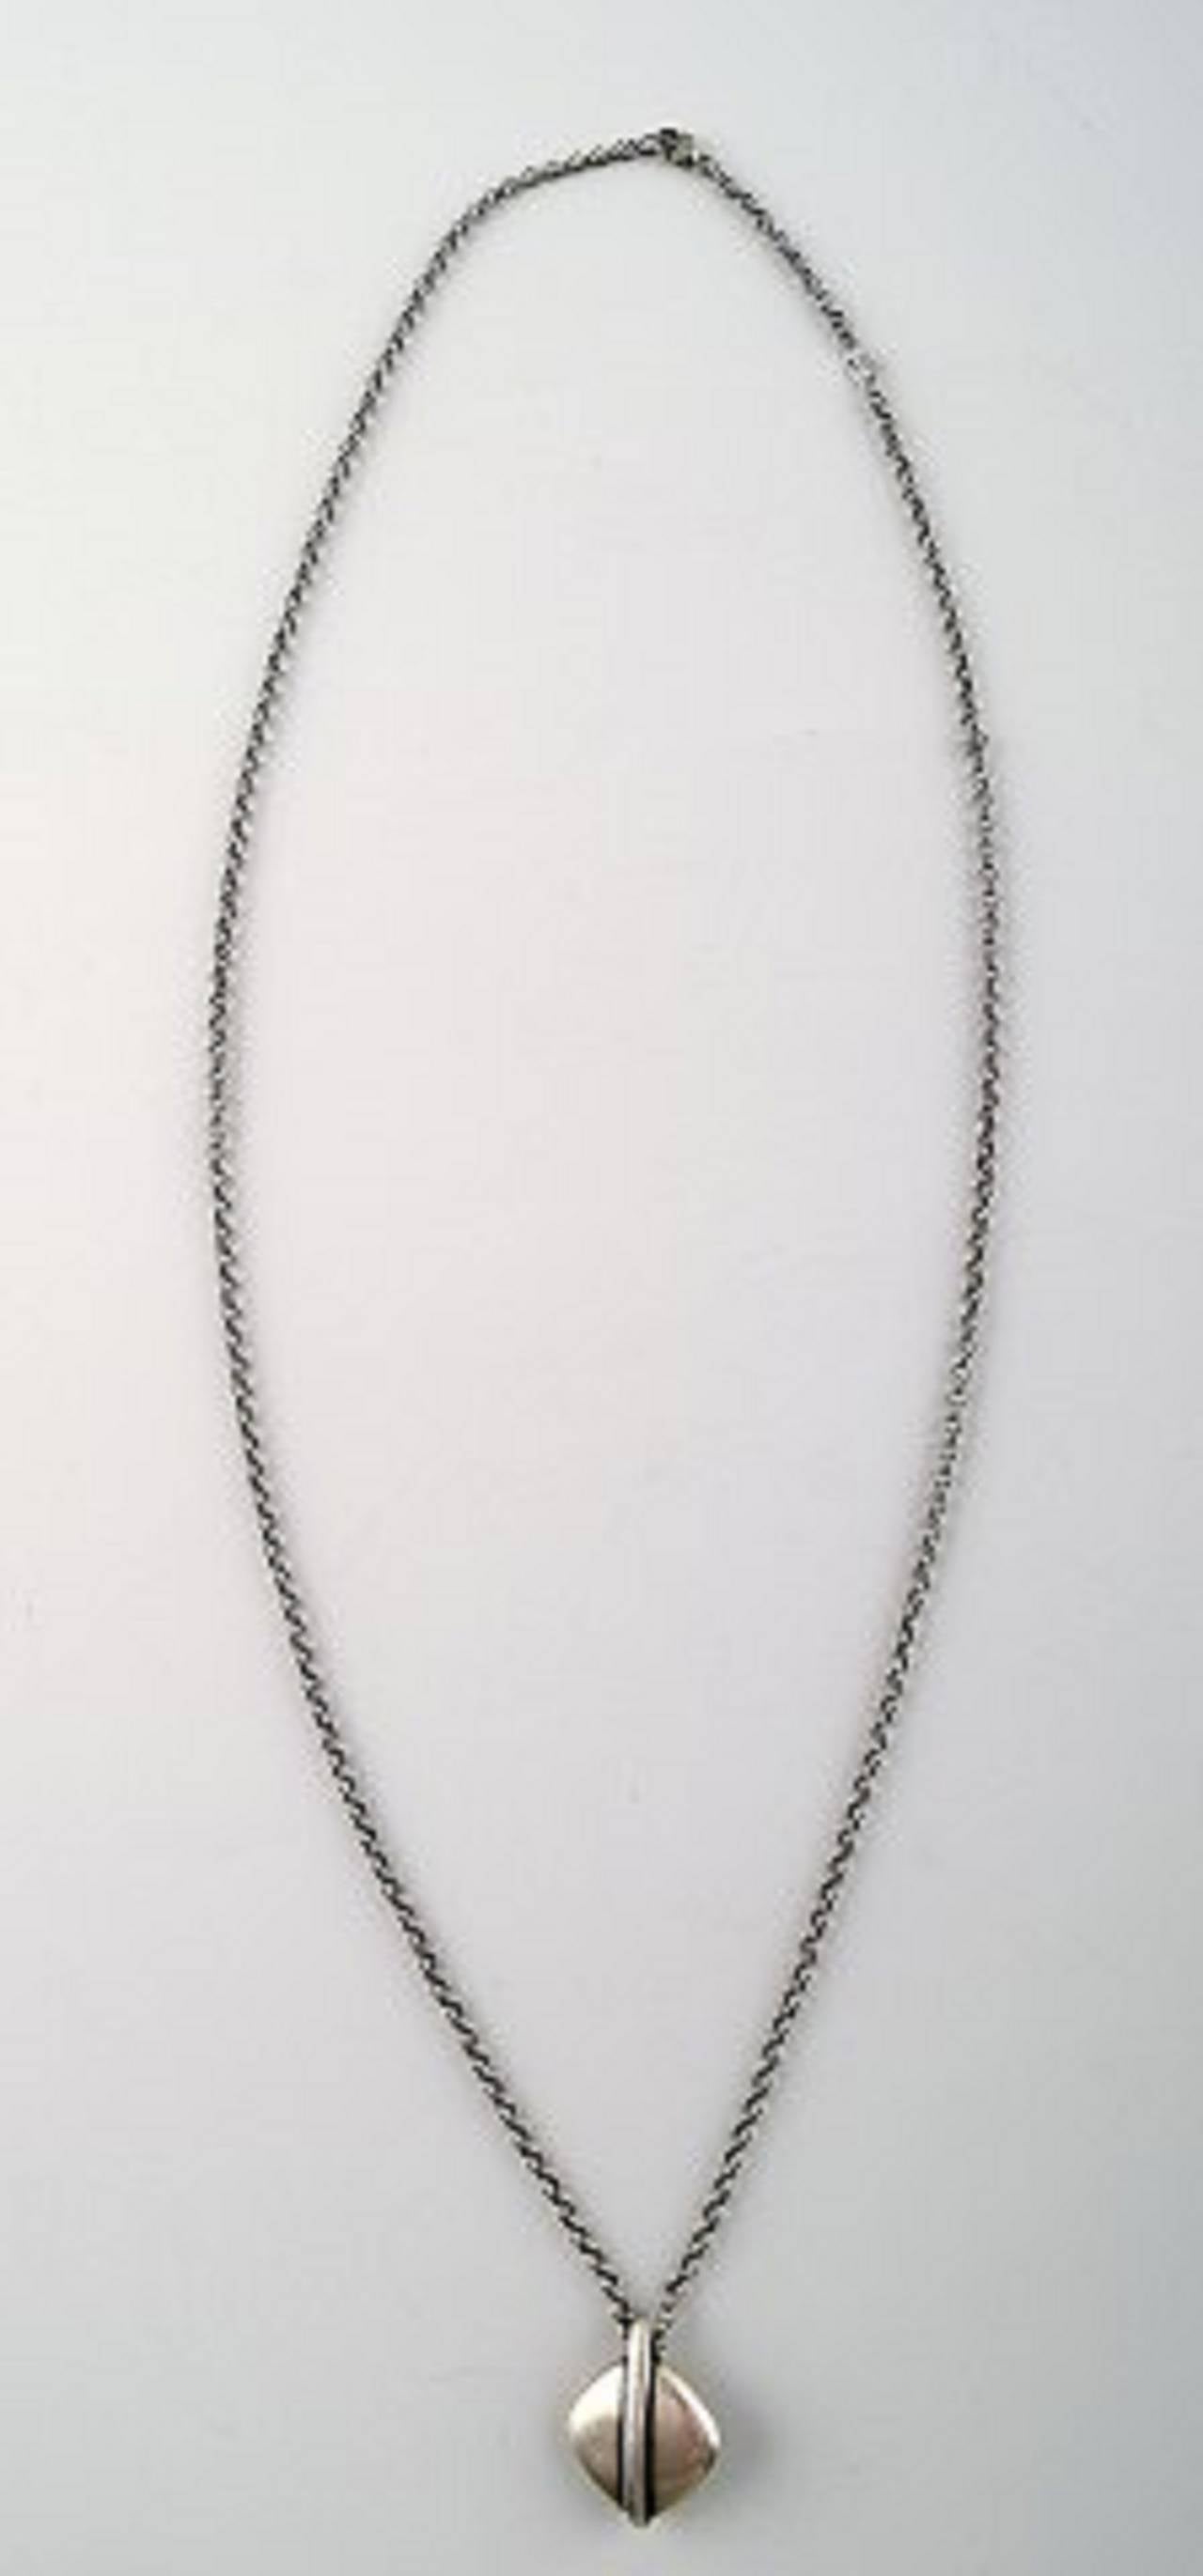 Georg Jensen necklace with pendant in sterling silver.
Length of chain 64 cm.
In very good condition.
Marked.